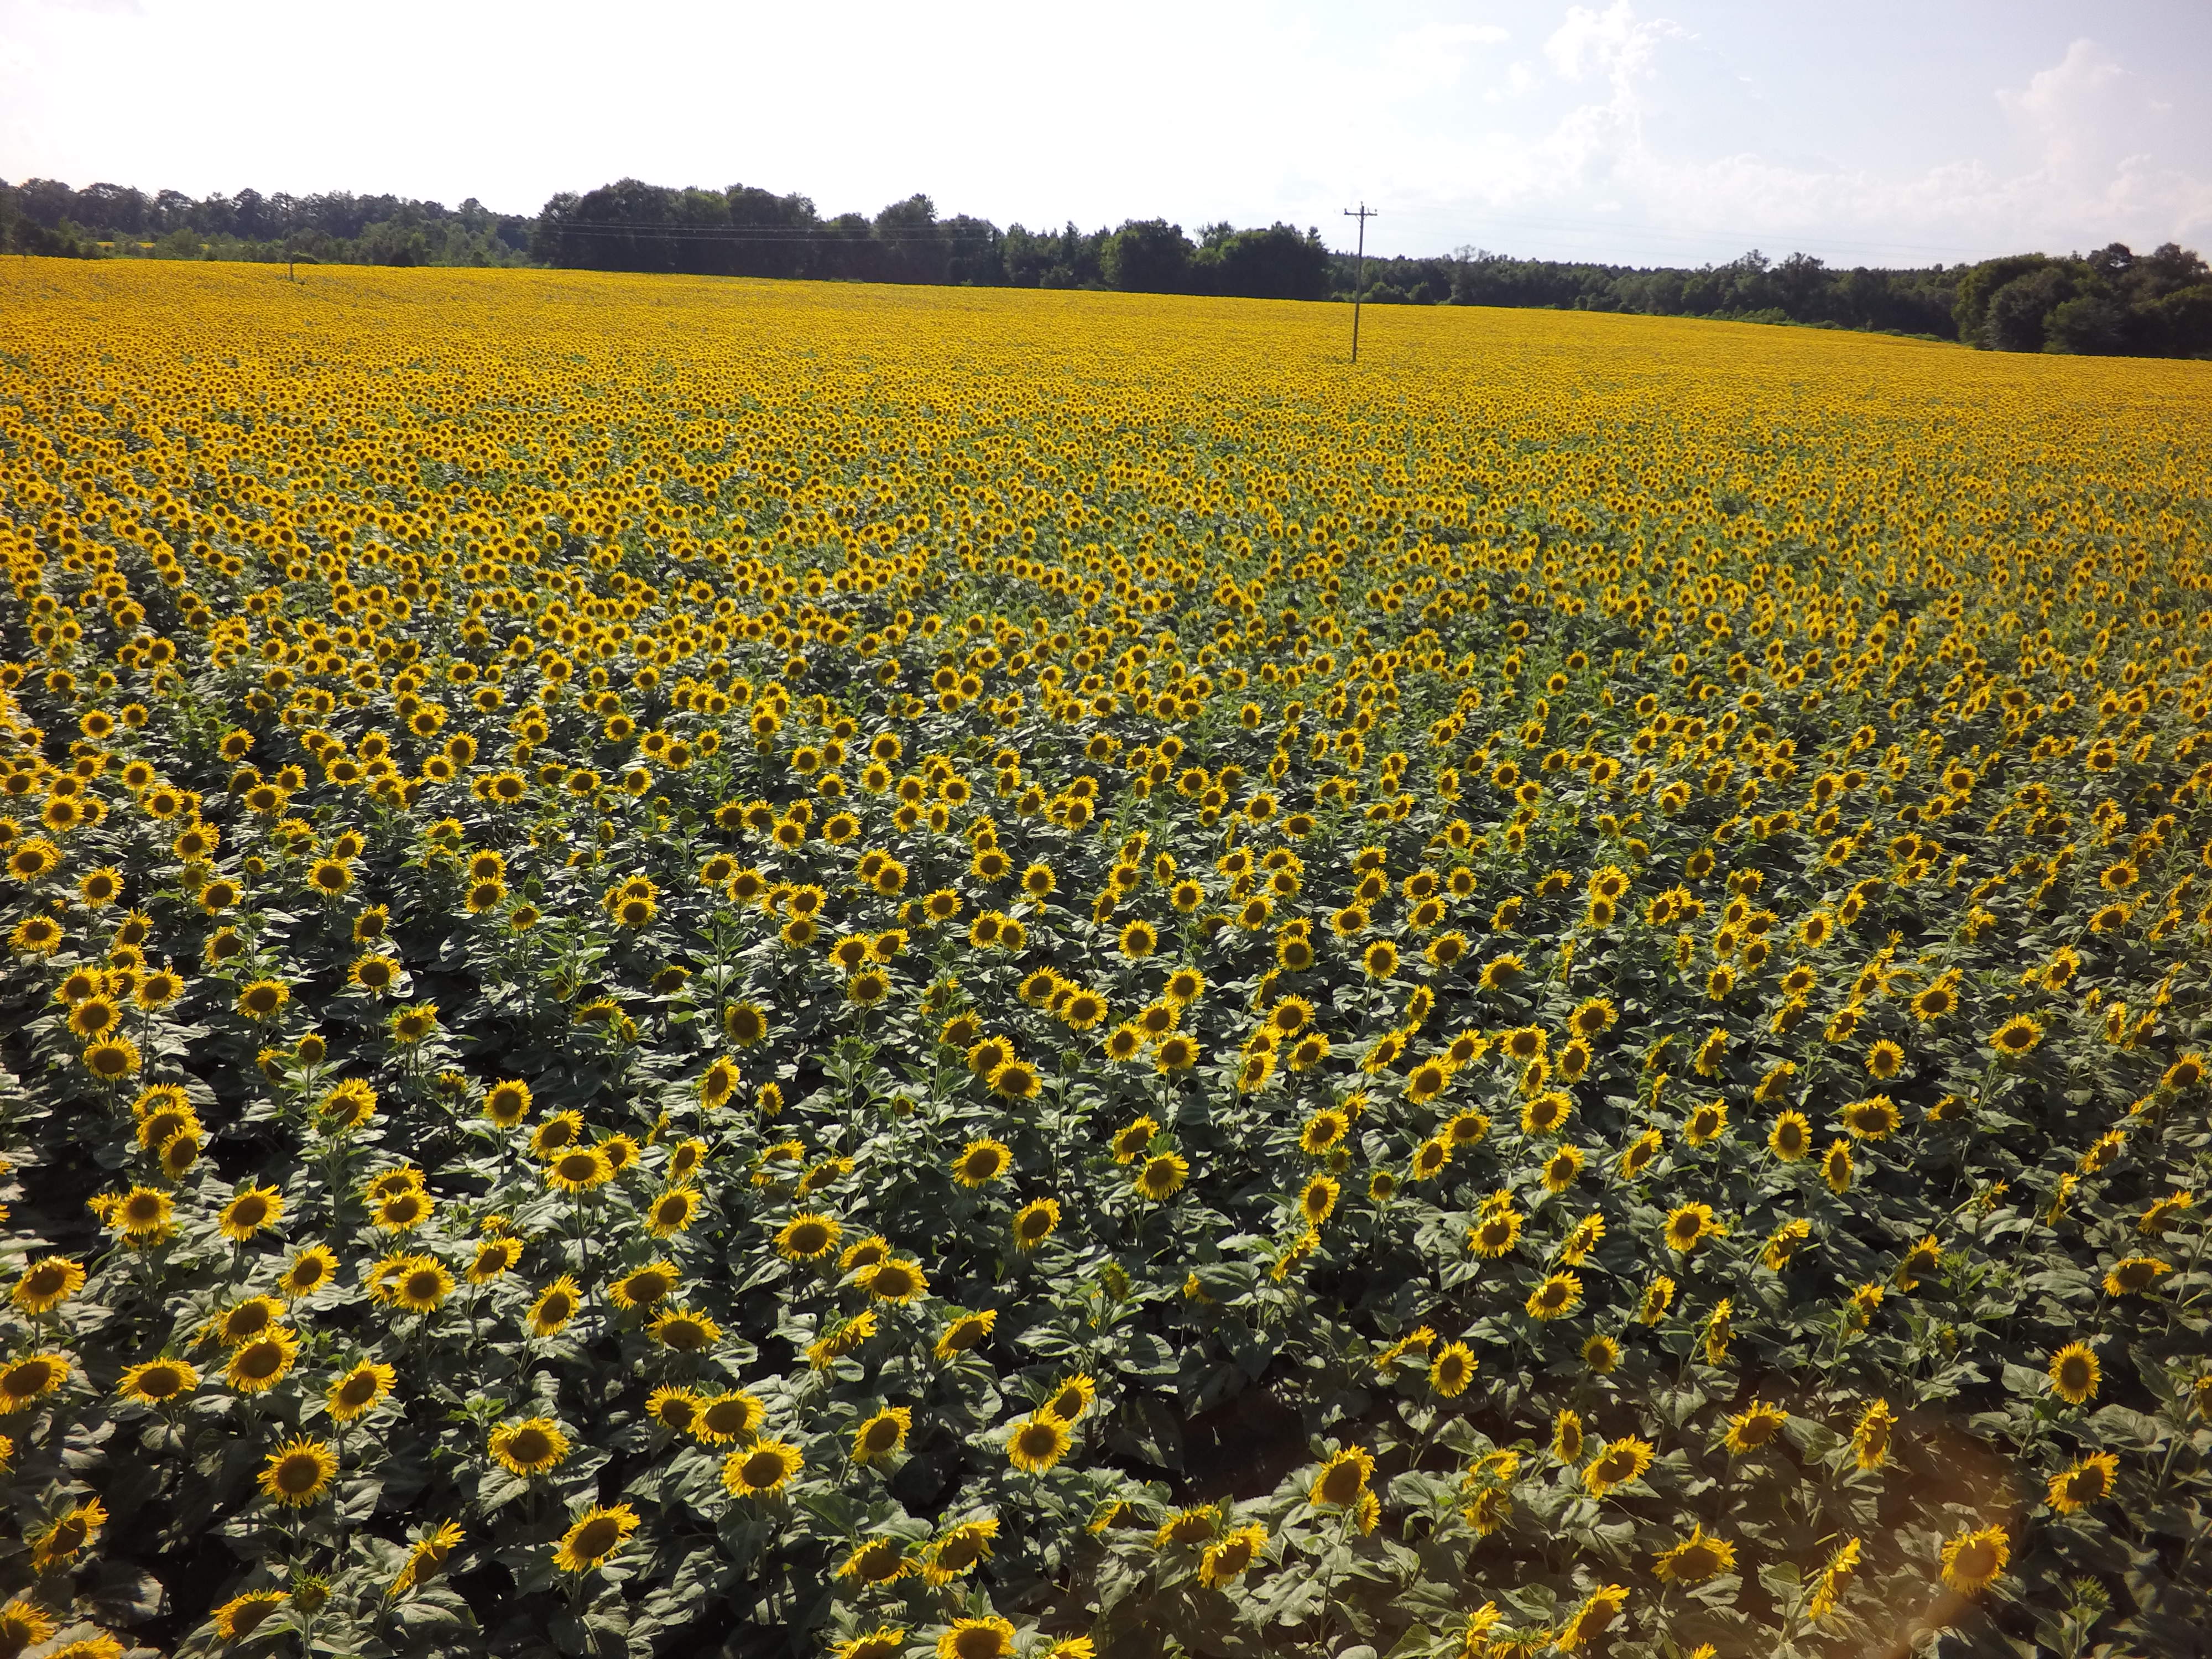 Autauga Sunflower Field Set to Bloom in Early July!